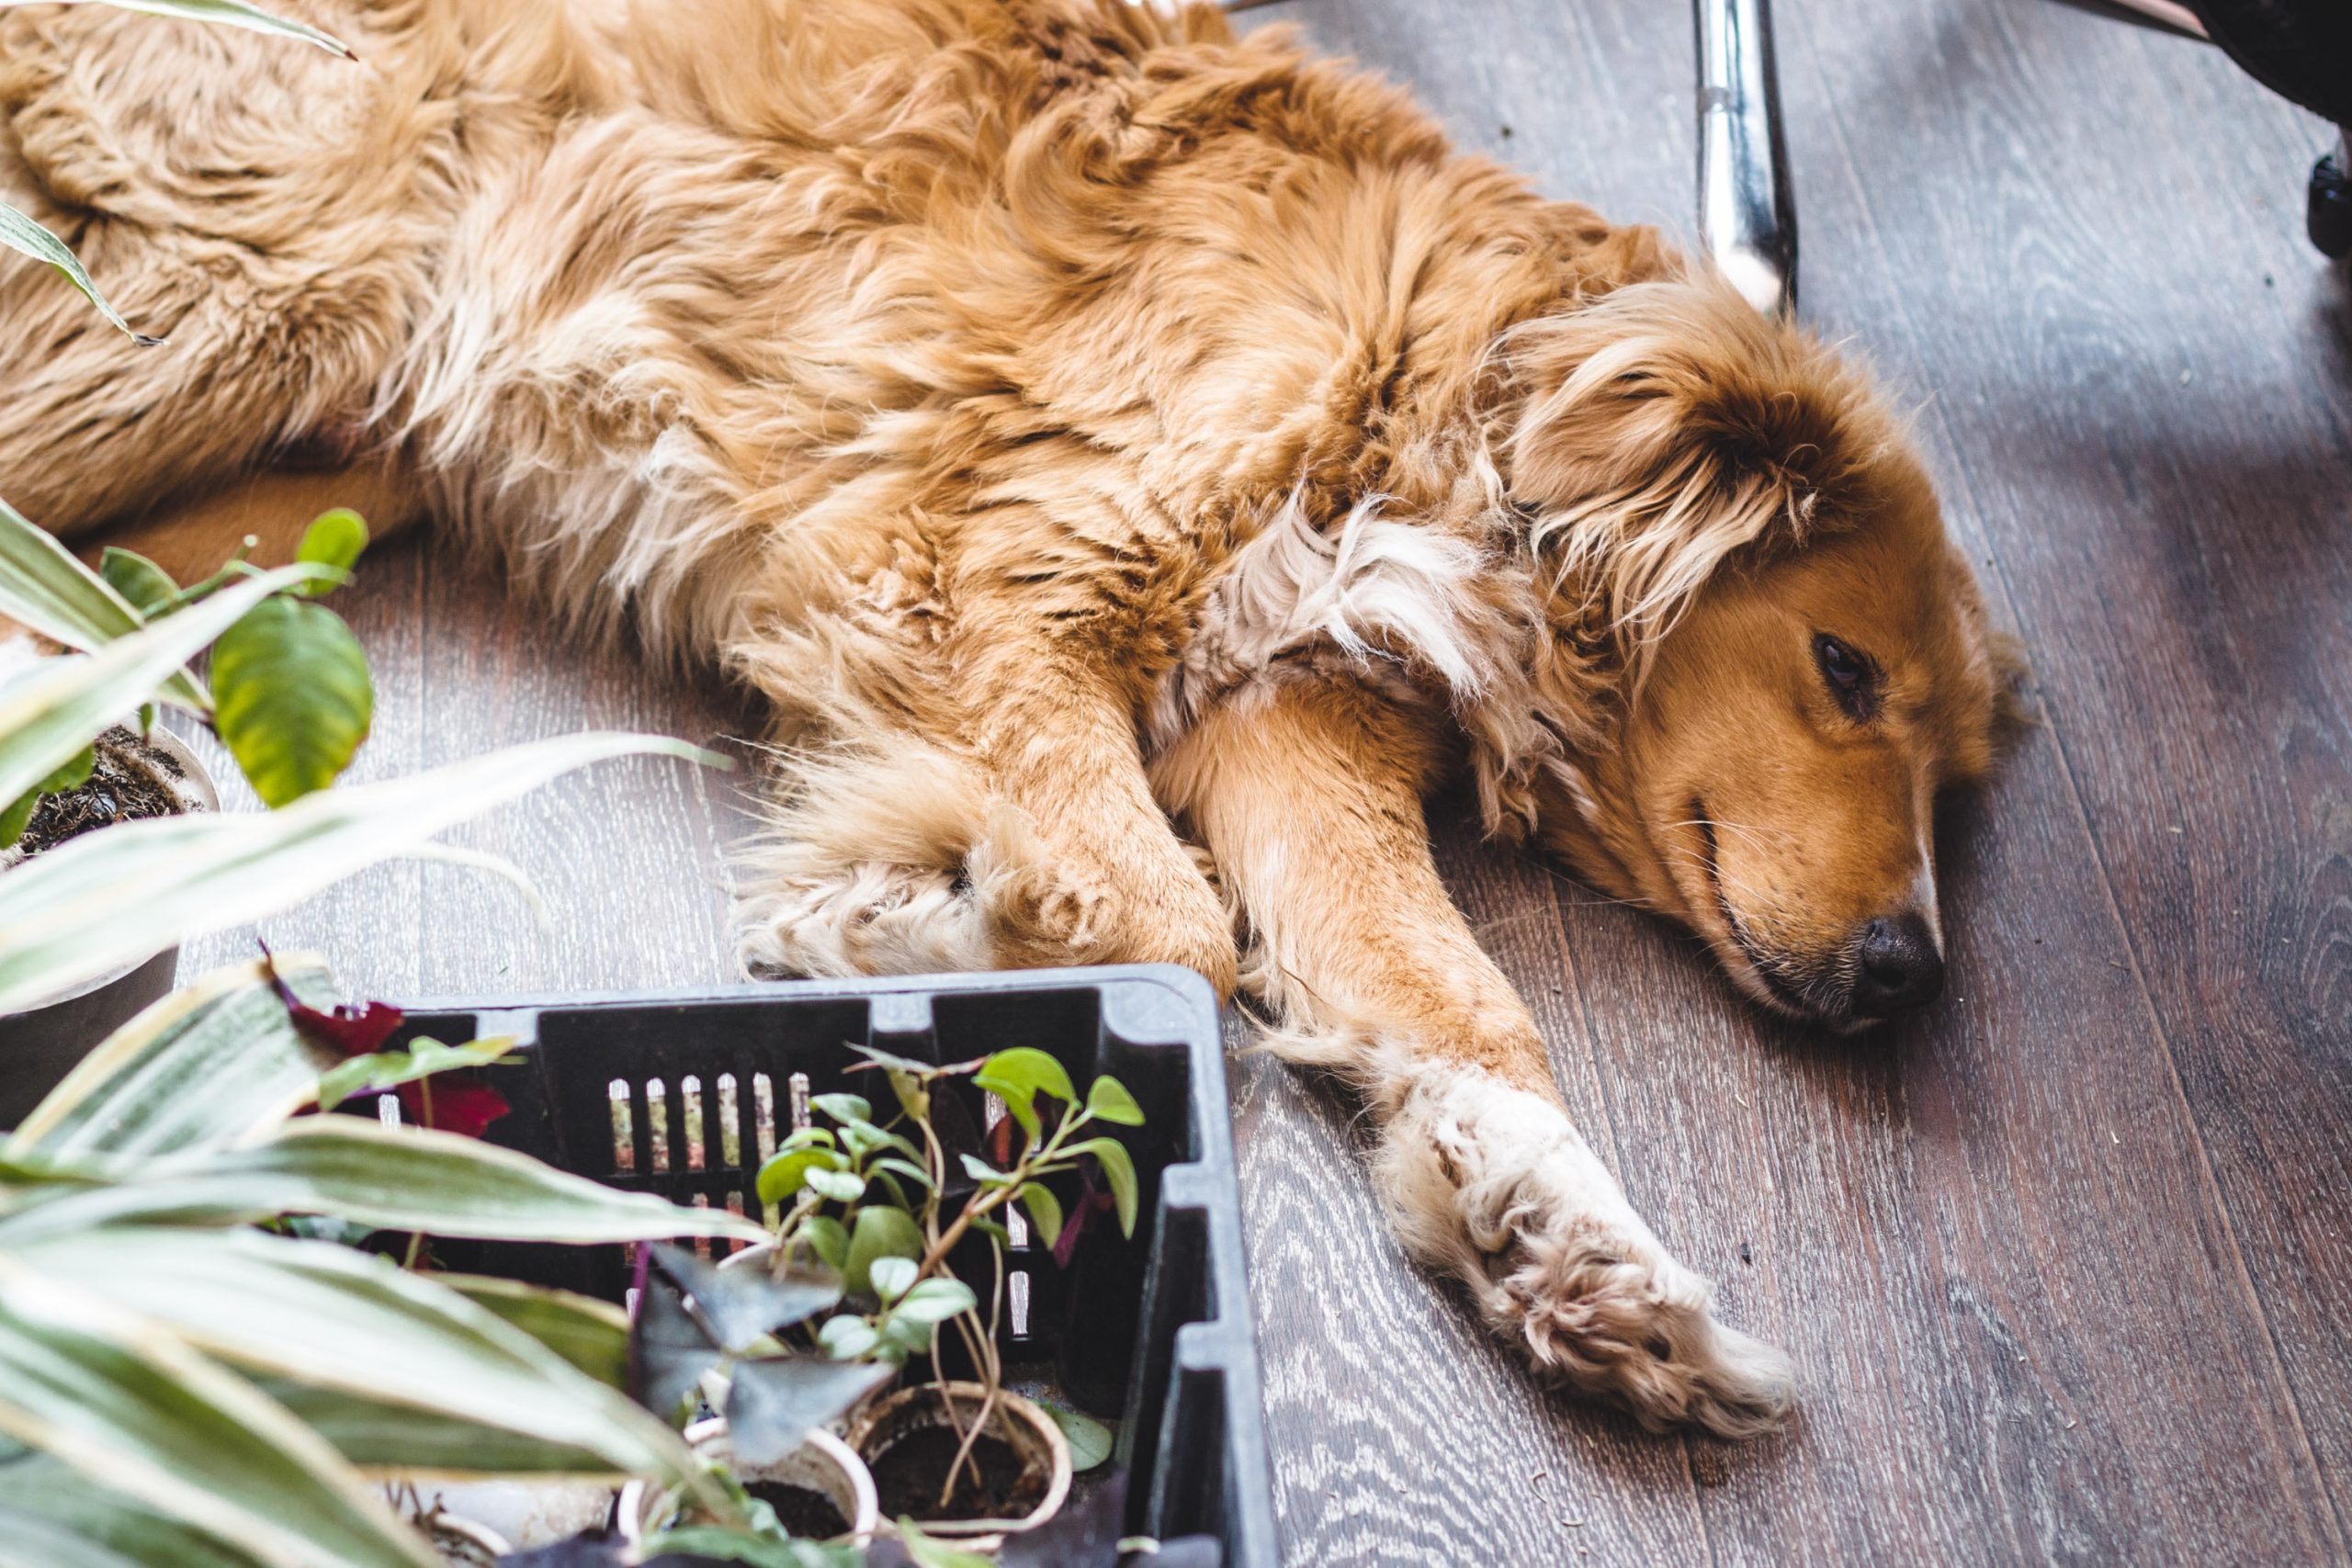 A Guide to Common Toxic Plants for Dogs and Pet Safety